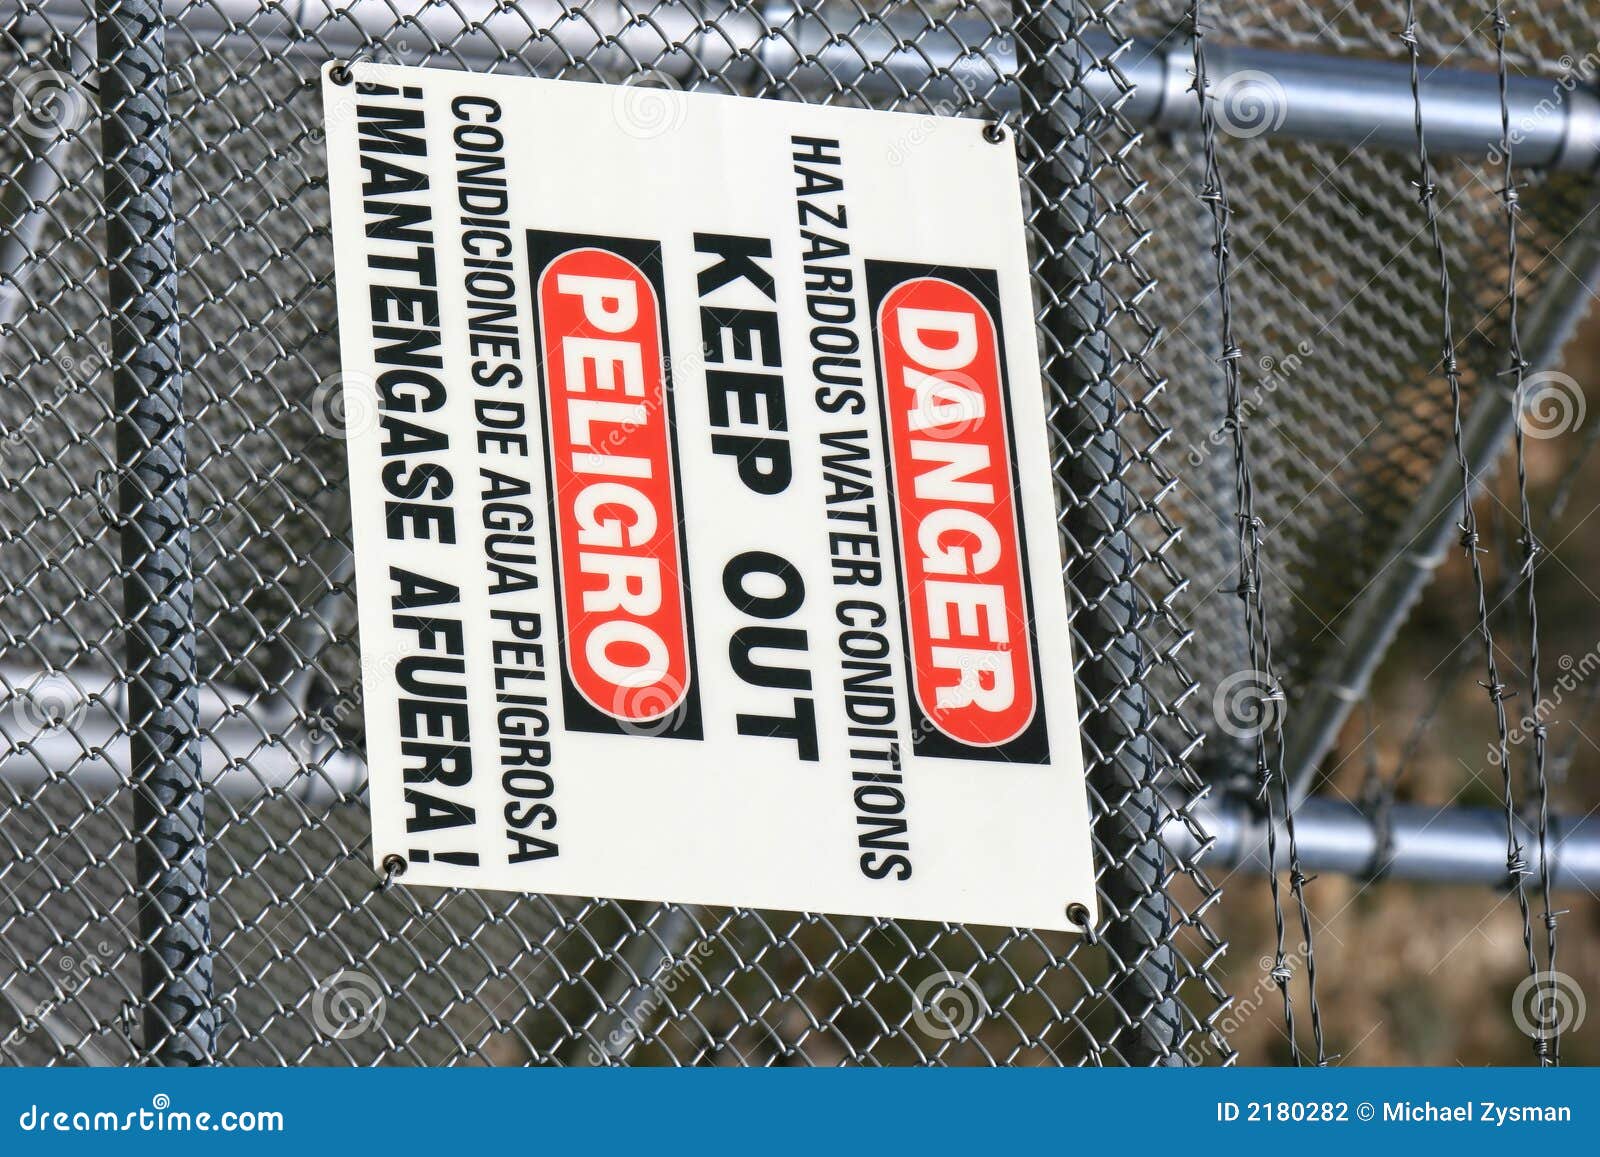 danger - keep out